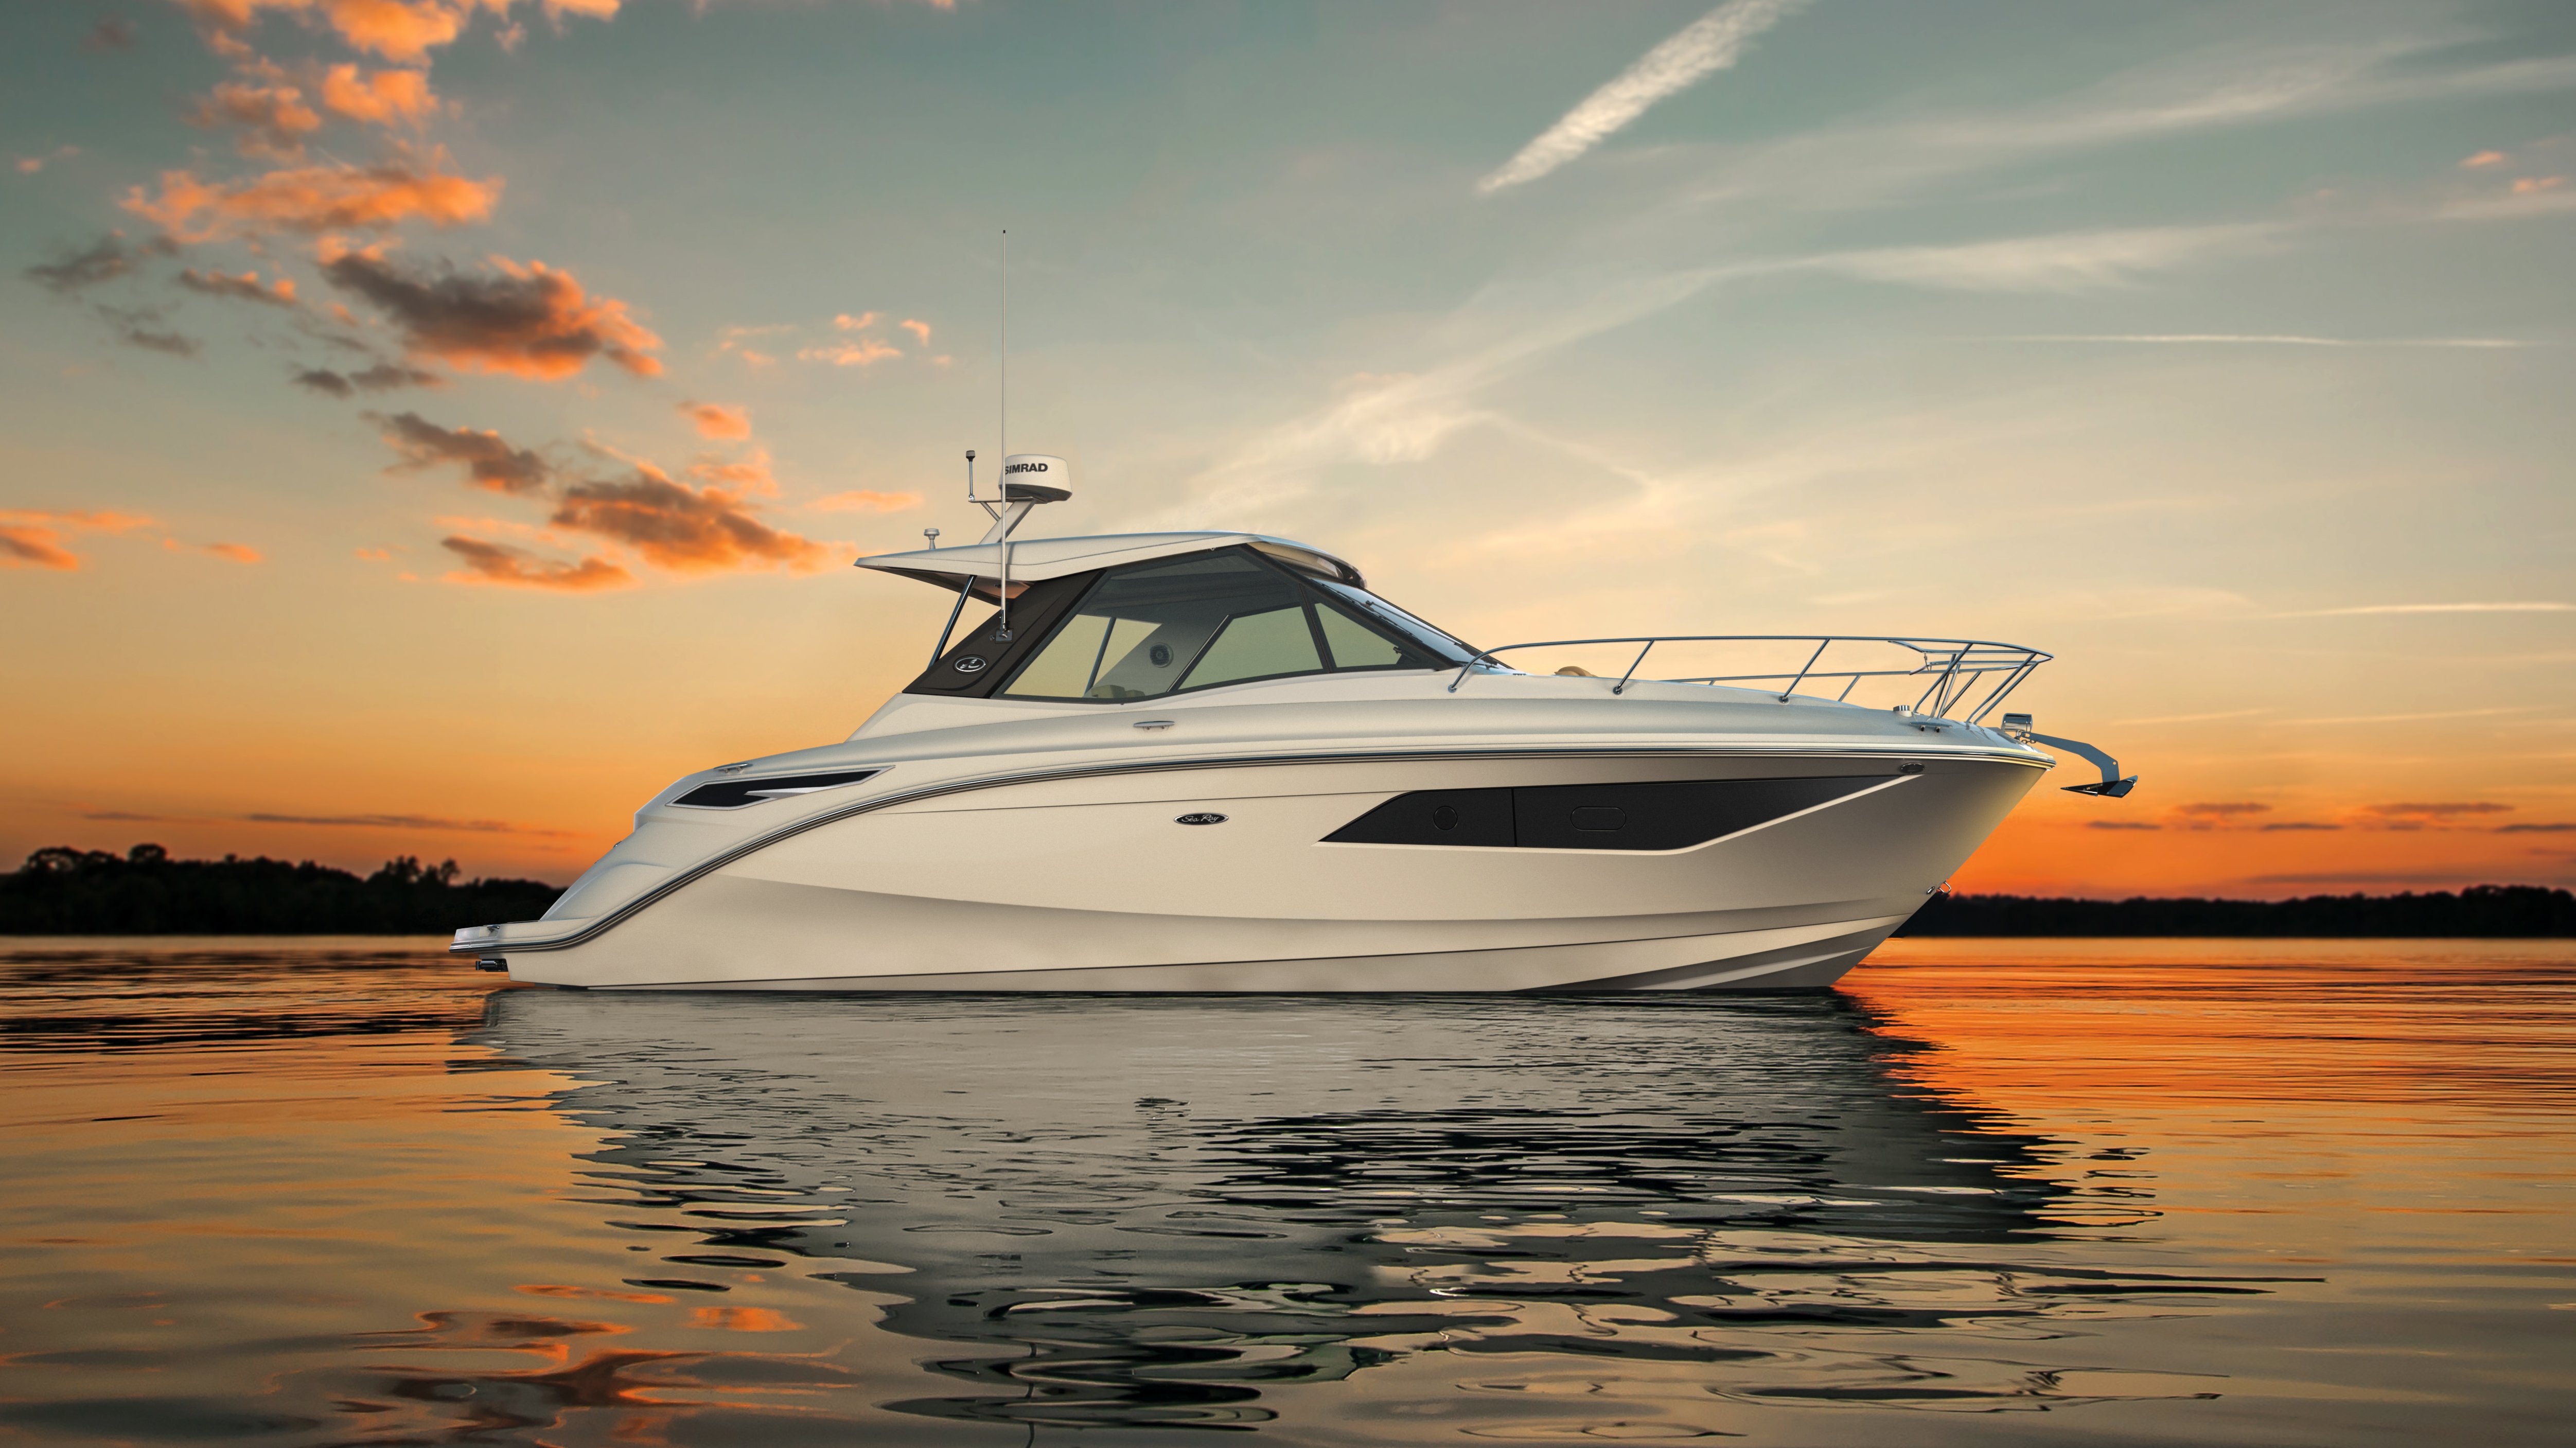 SEA-RAY®'S-NEW-SUNDANCER-320-COUPE-MAKES-ITS-EUROPEAN-DEBUT-AT-THE